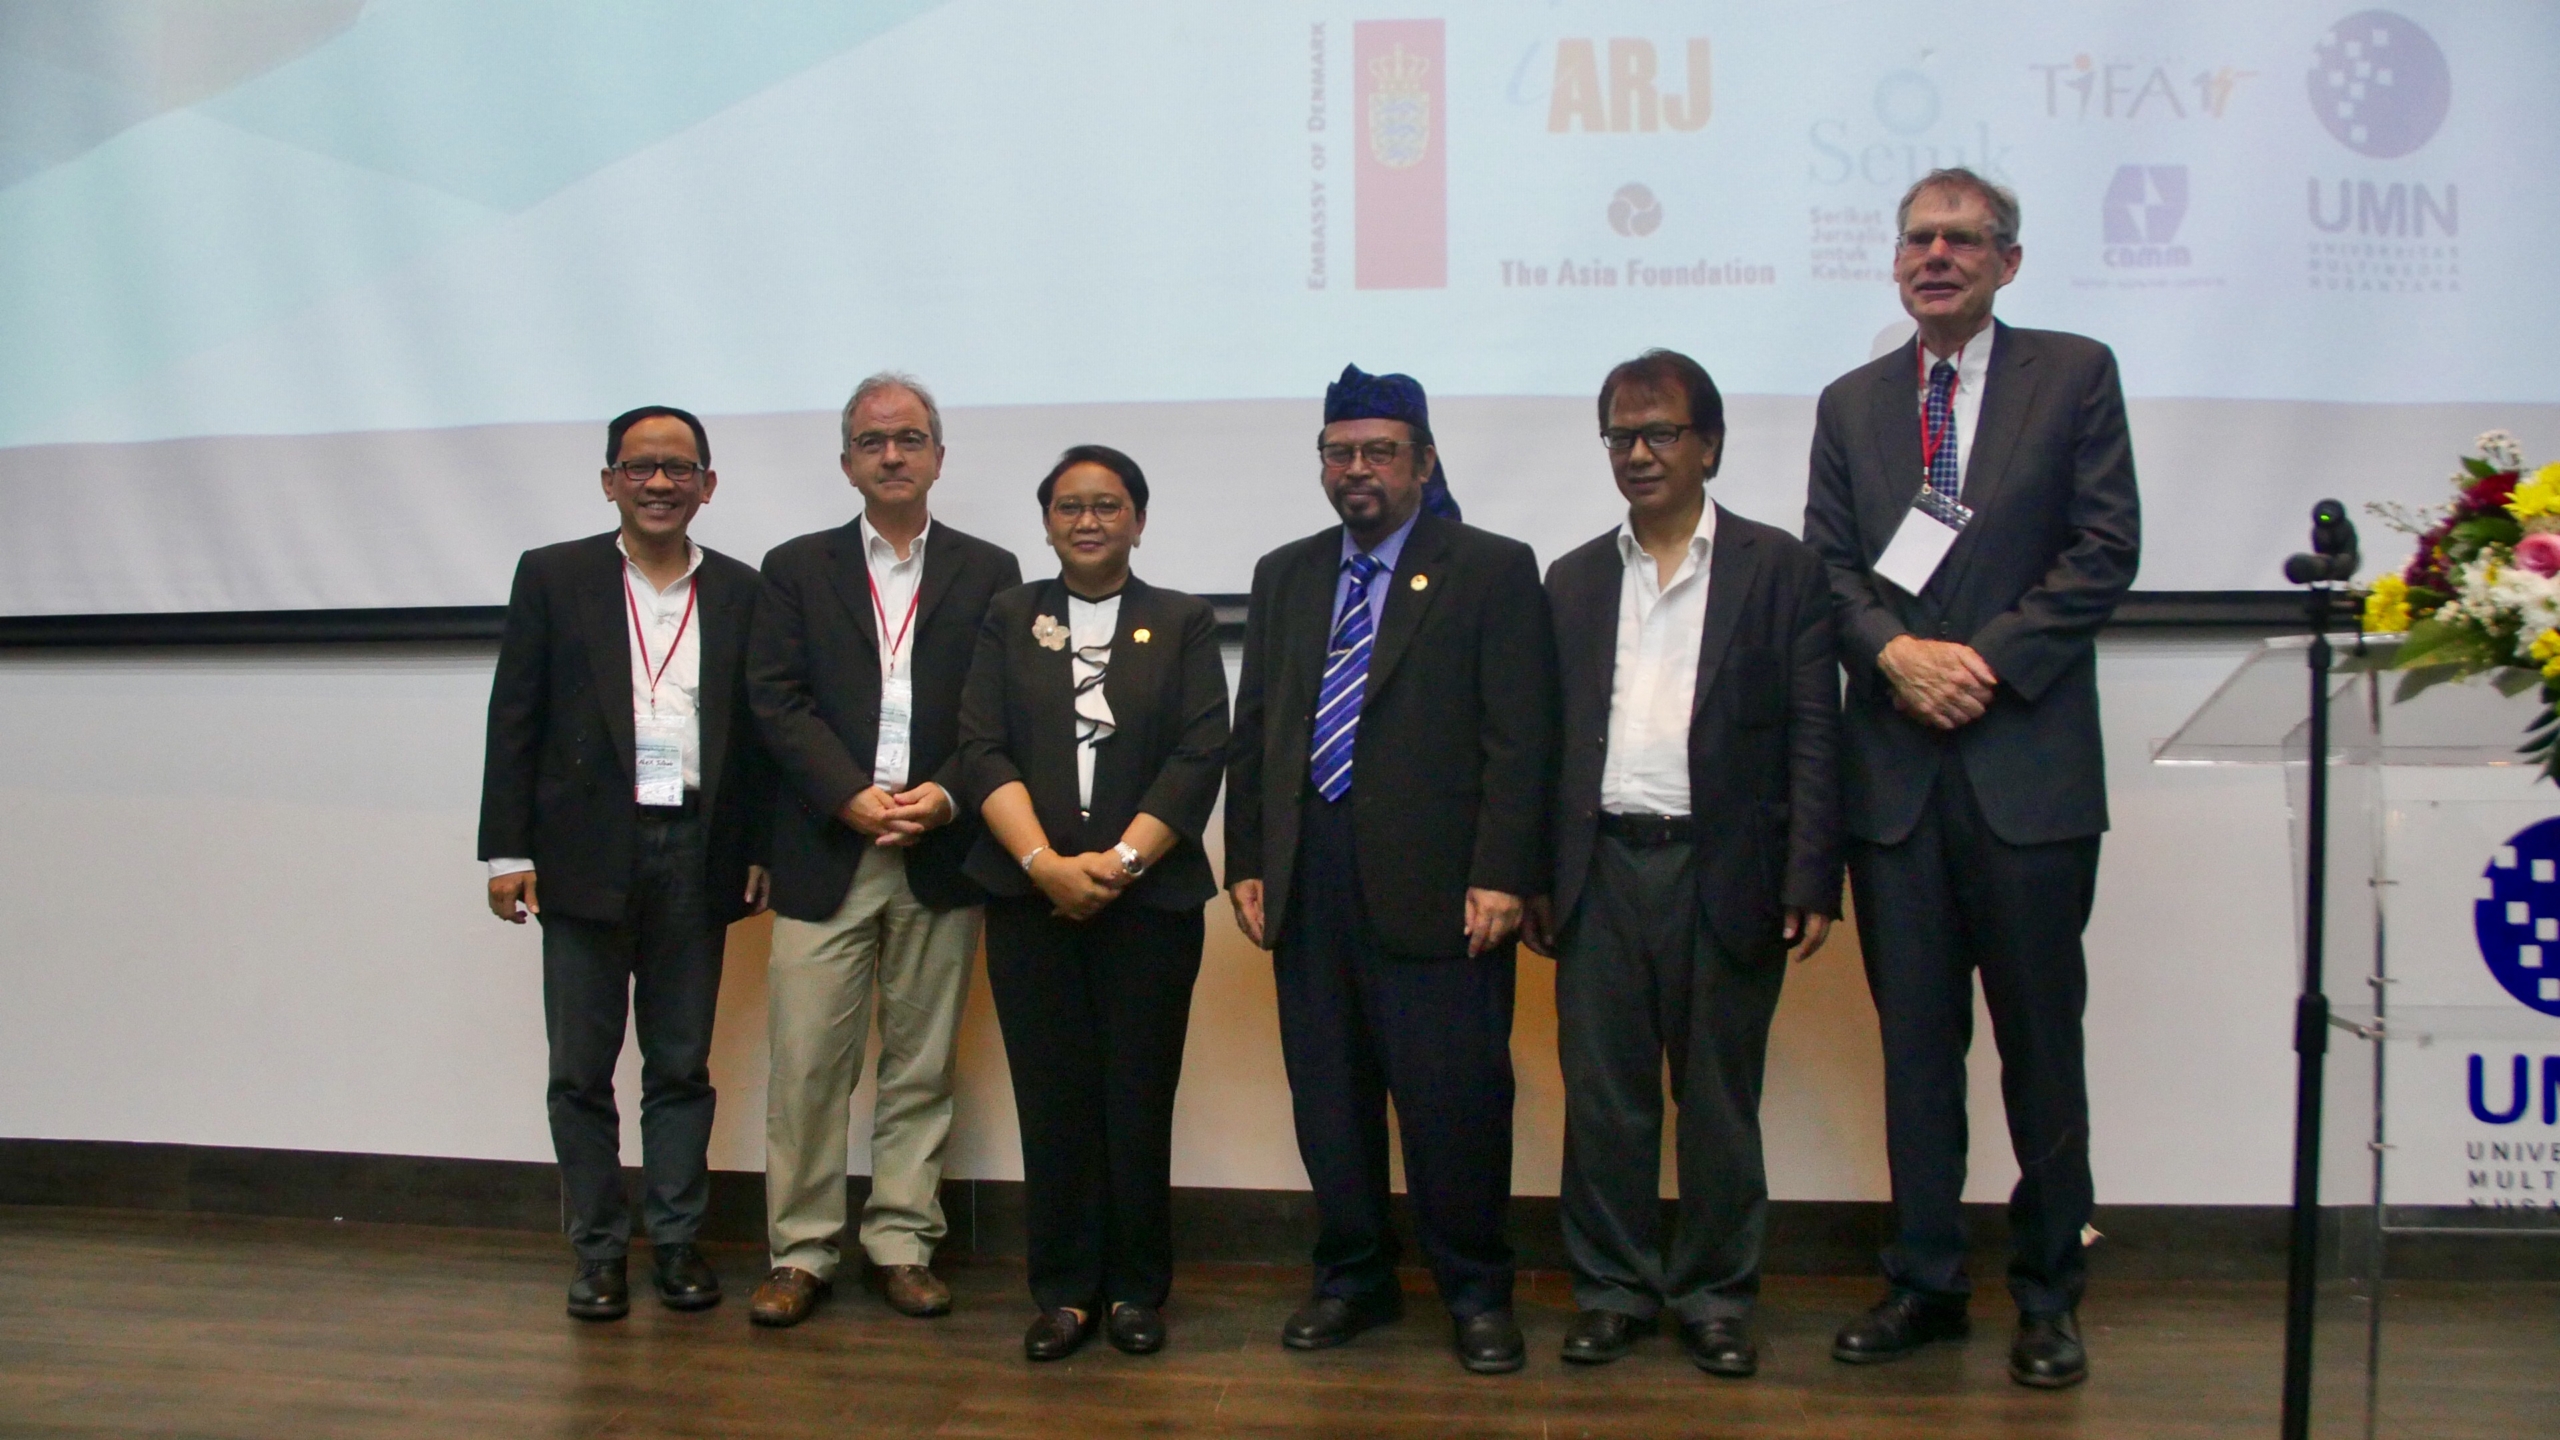 A group of journalists pose for photos at the 2017 IARJ Global Conference in Jakarta